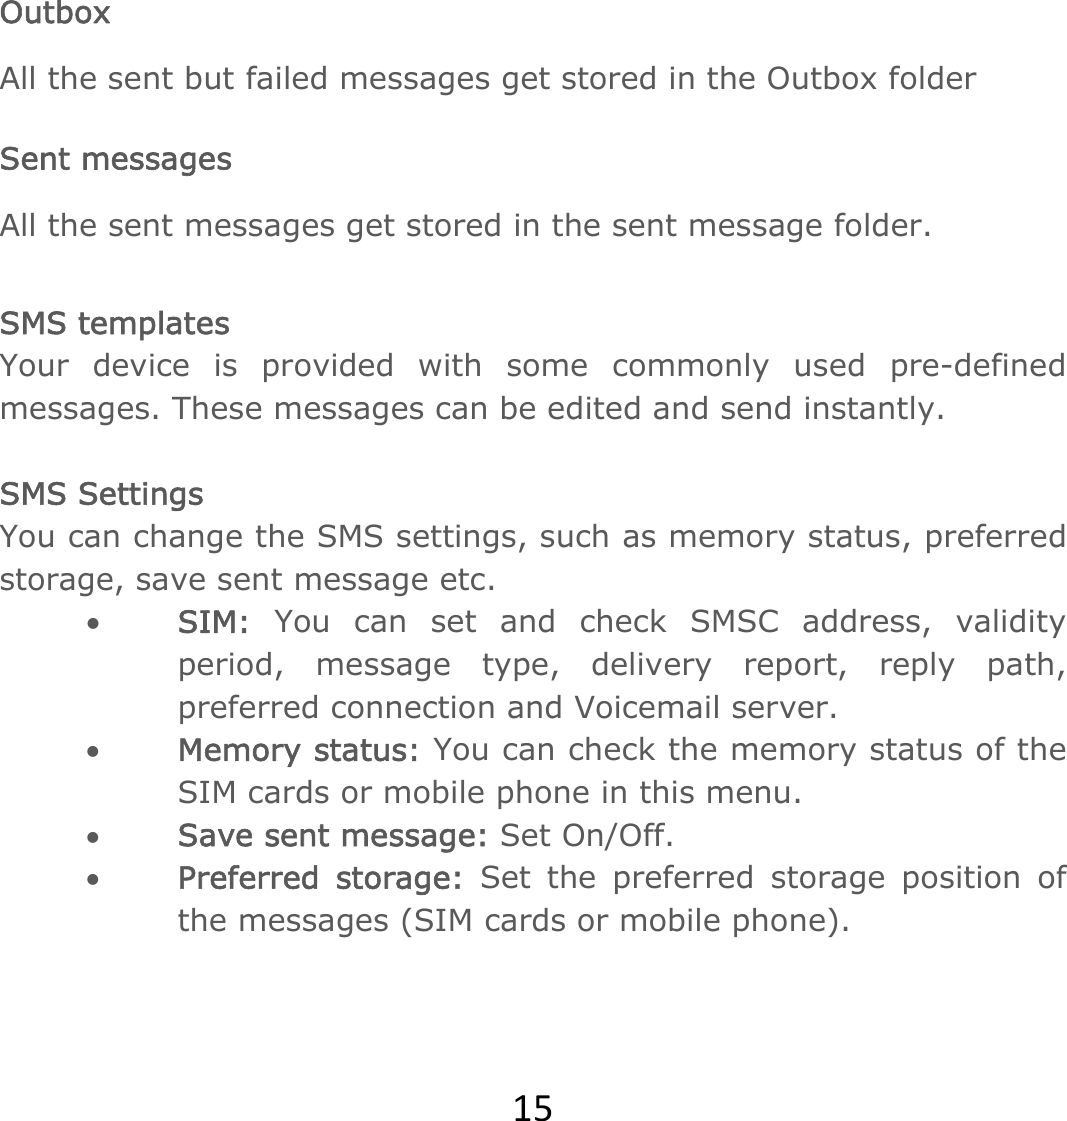 15 Outbox All the sent but failed messages get stored in the Outbox folder   Sent messages All the sent messages get stored in the sent message folder.  SMS templates Your device is provided with some commonly used pre-defined messages. These messages can be edited and send instantly.  SMS Settings You can change the SMS settings, such as memory status, preferred storage, save sent message etc. • SIM: You can set and check SMSC address, validity period, message type, delivery report, reply path, preferred connection and Voicemail server. • Memory status: You can check the memory status of the SIM cards or mobile phone in this menu.  • Save sent message: Set On/Off. • Preferred storage: Set the preferred storage position of the messages (SIM cards or mobile phone).    